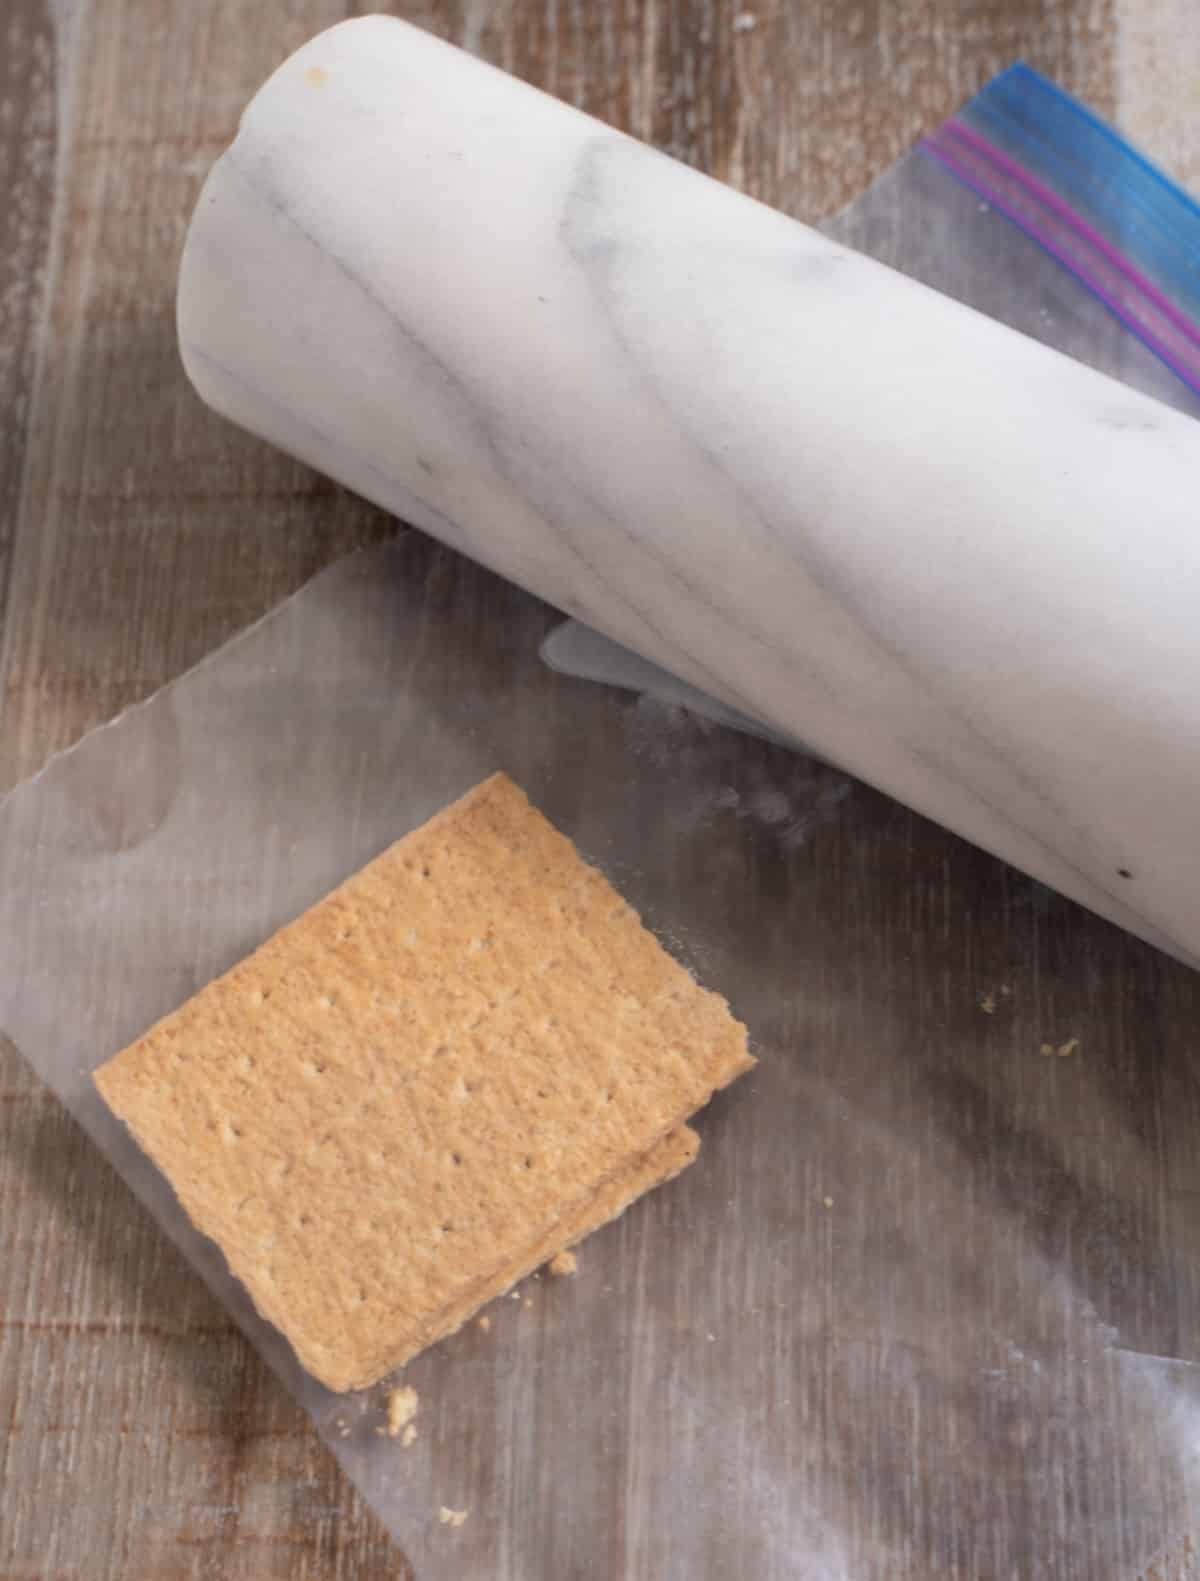 graham cracker in resealable plastic bag next to rolling pin